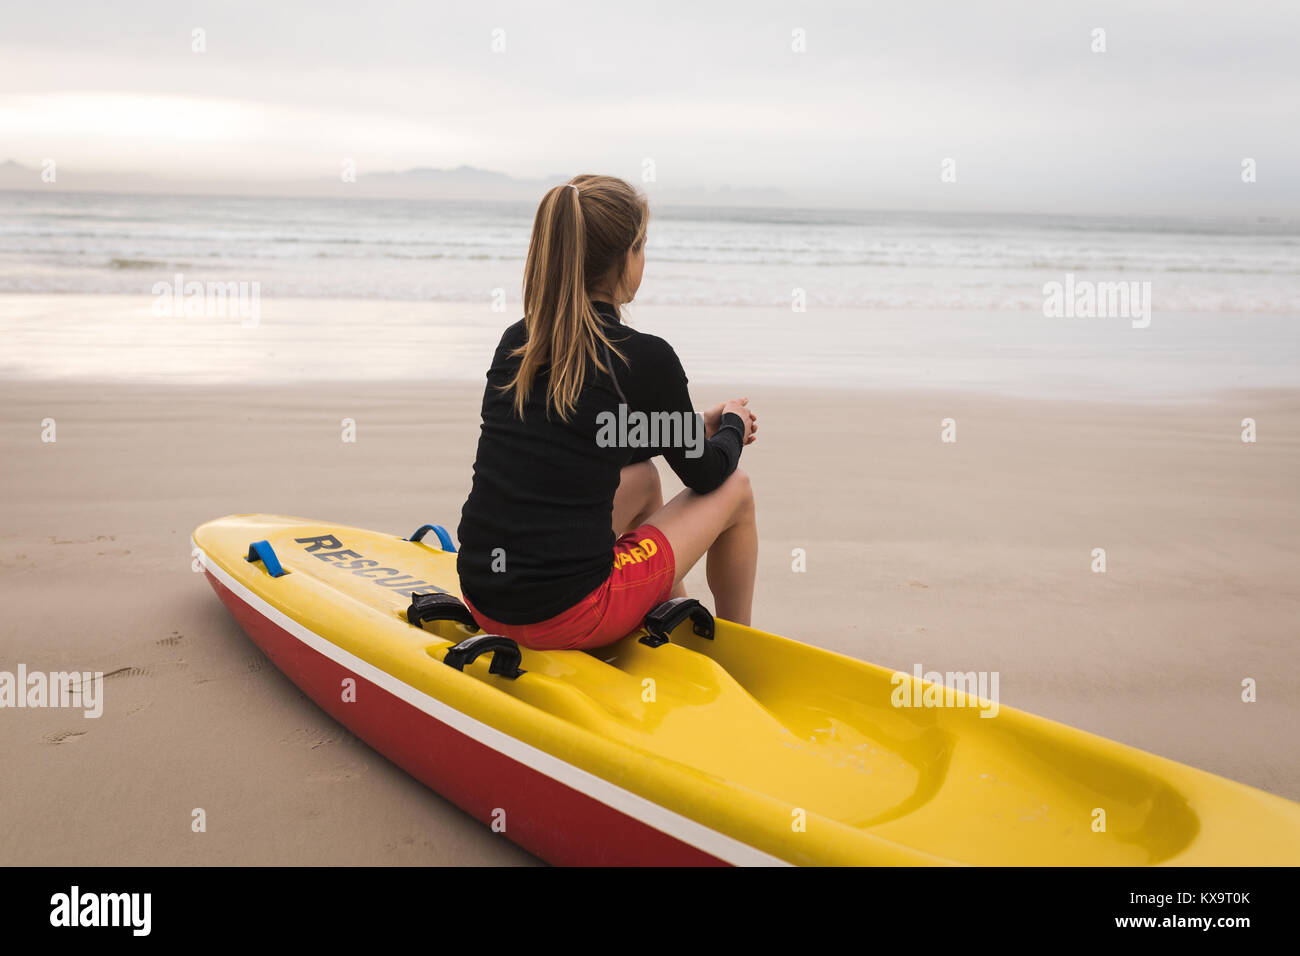 Female lifeguard sitting on rescue boat at beach Stock Photo